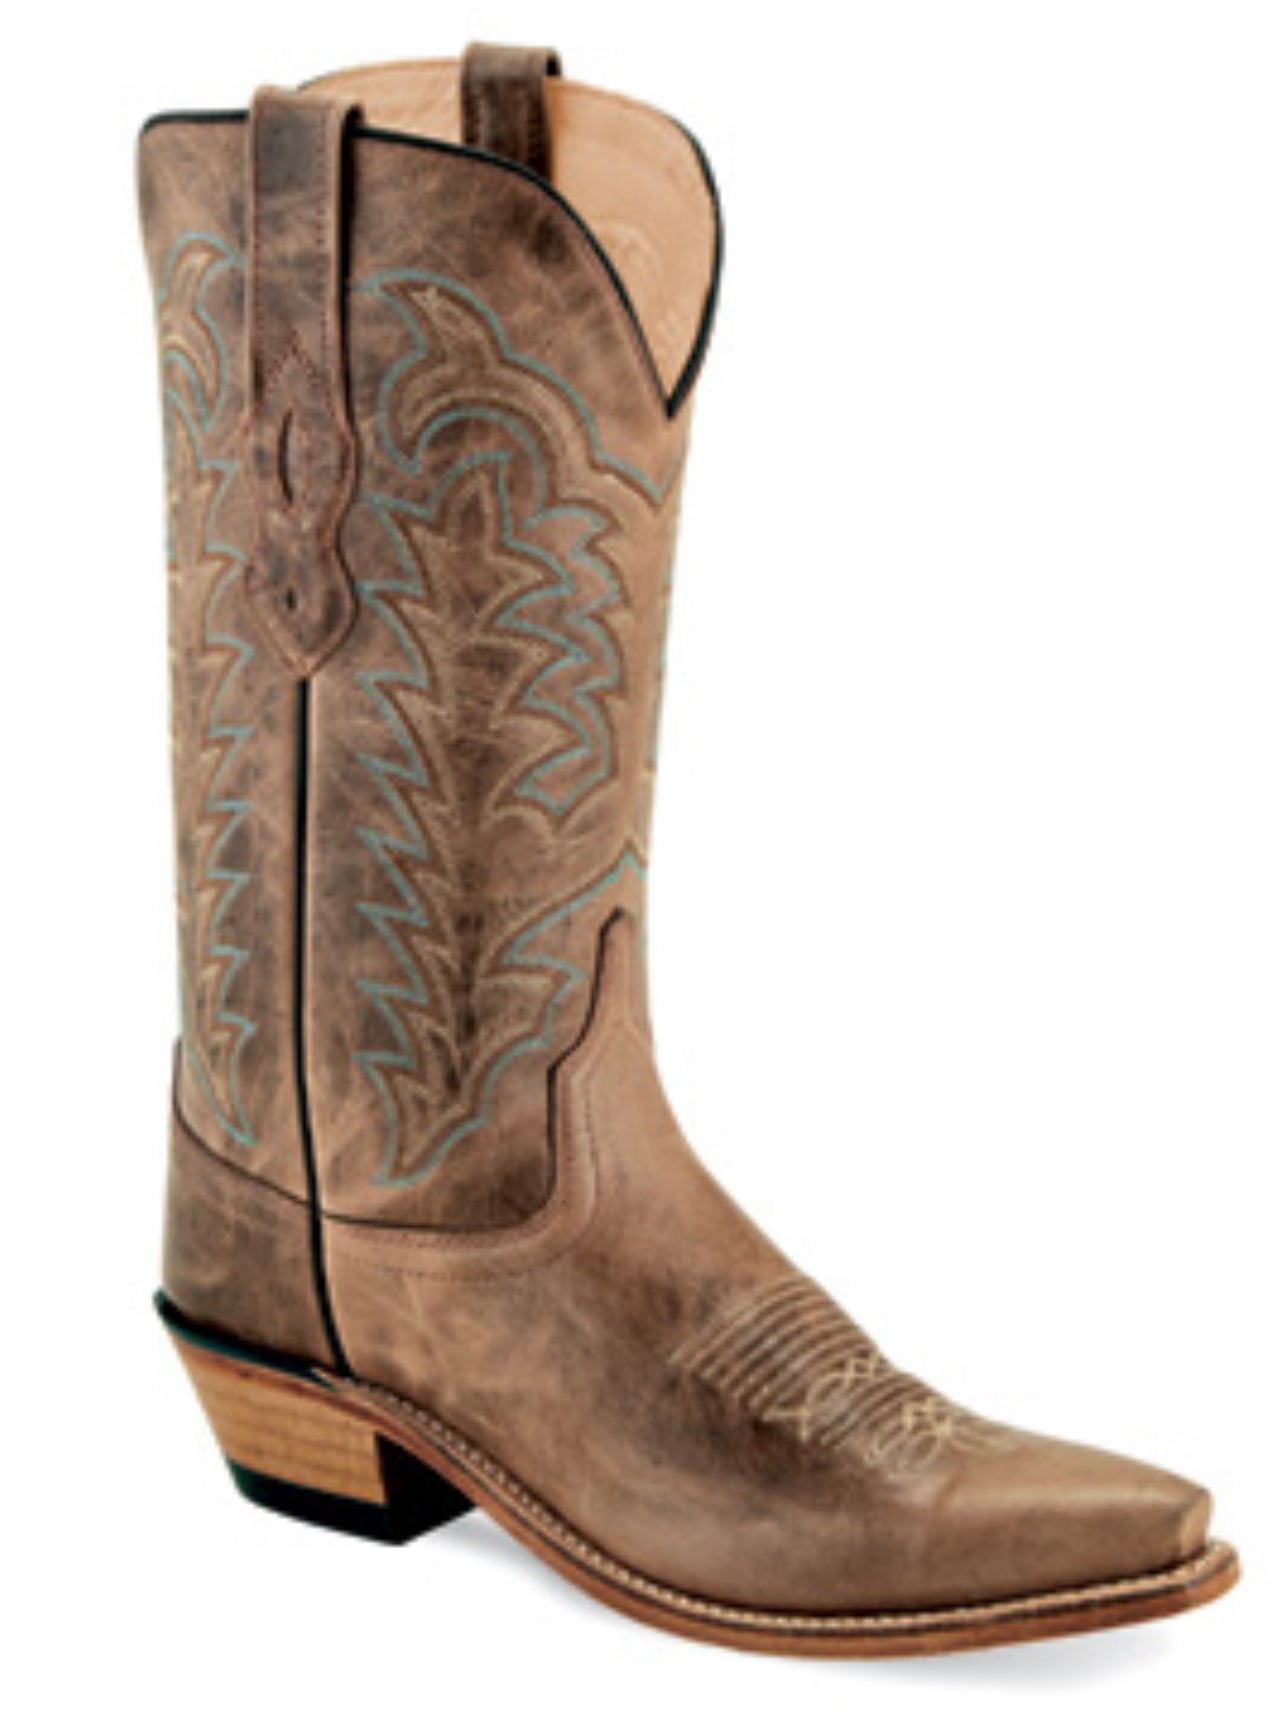 Distressed Brown Women's Boots by Old West